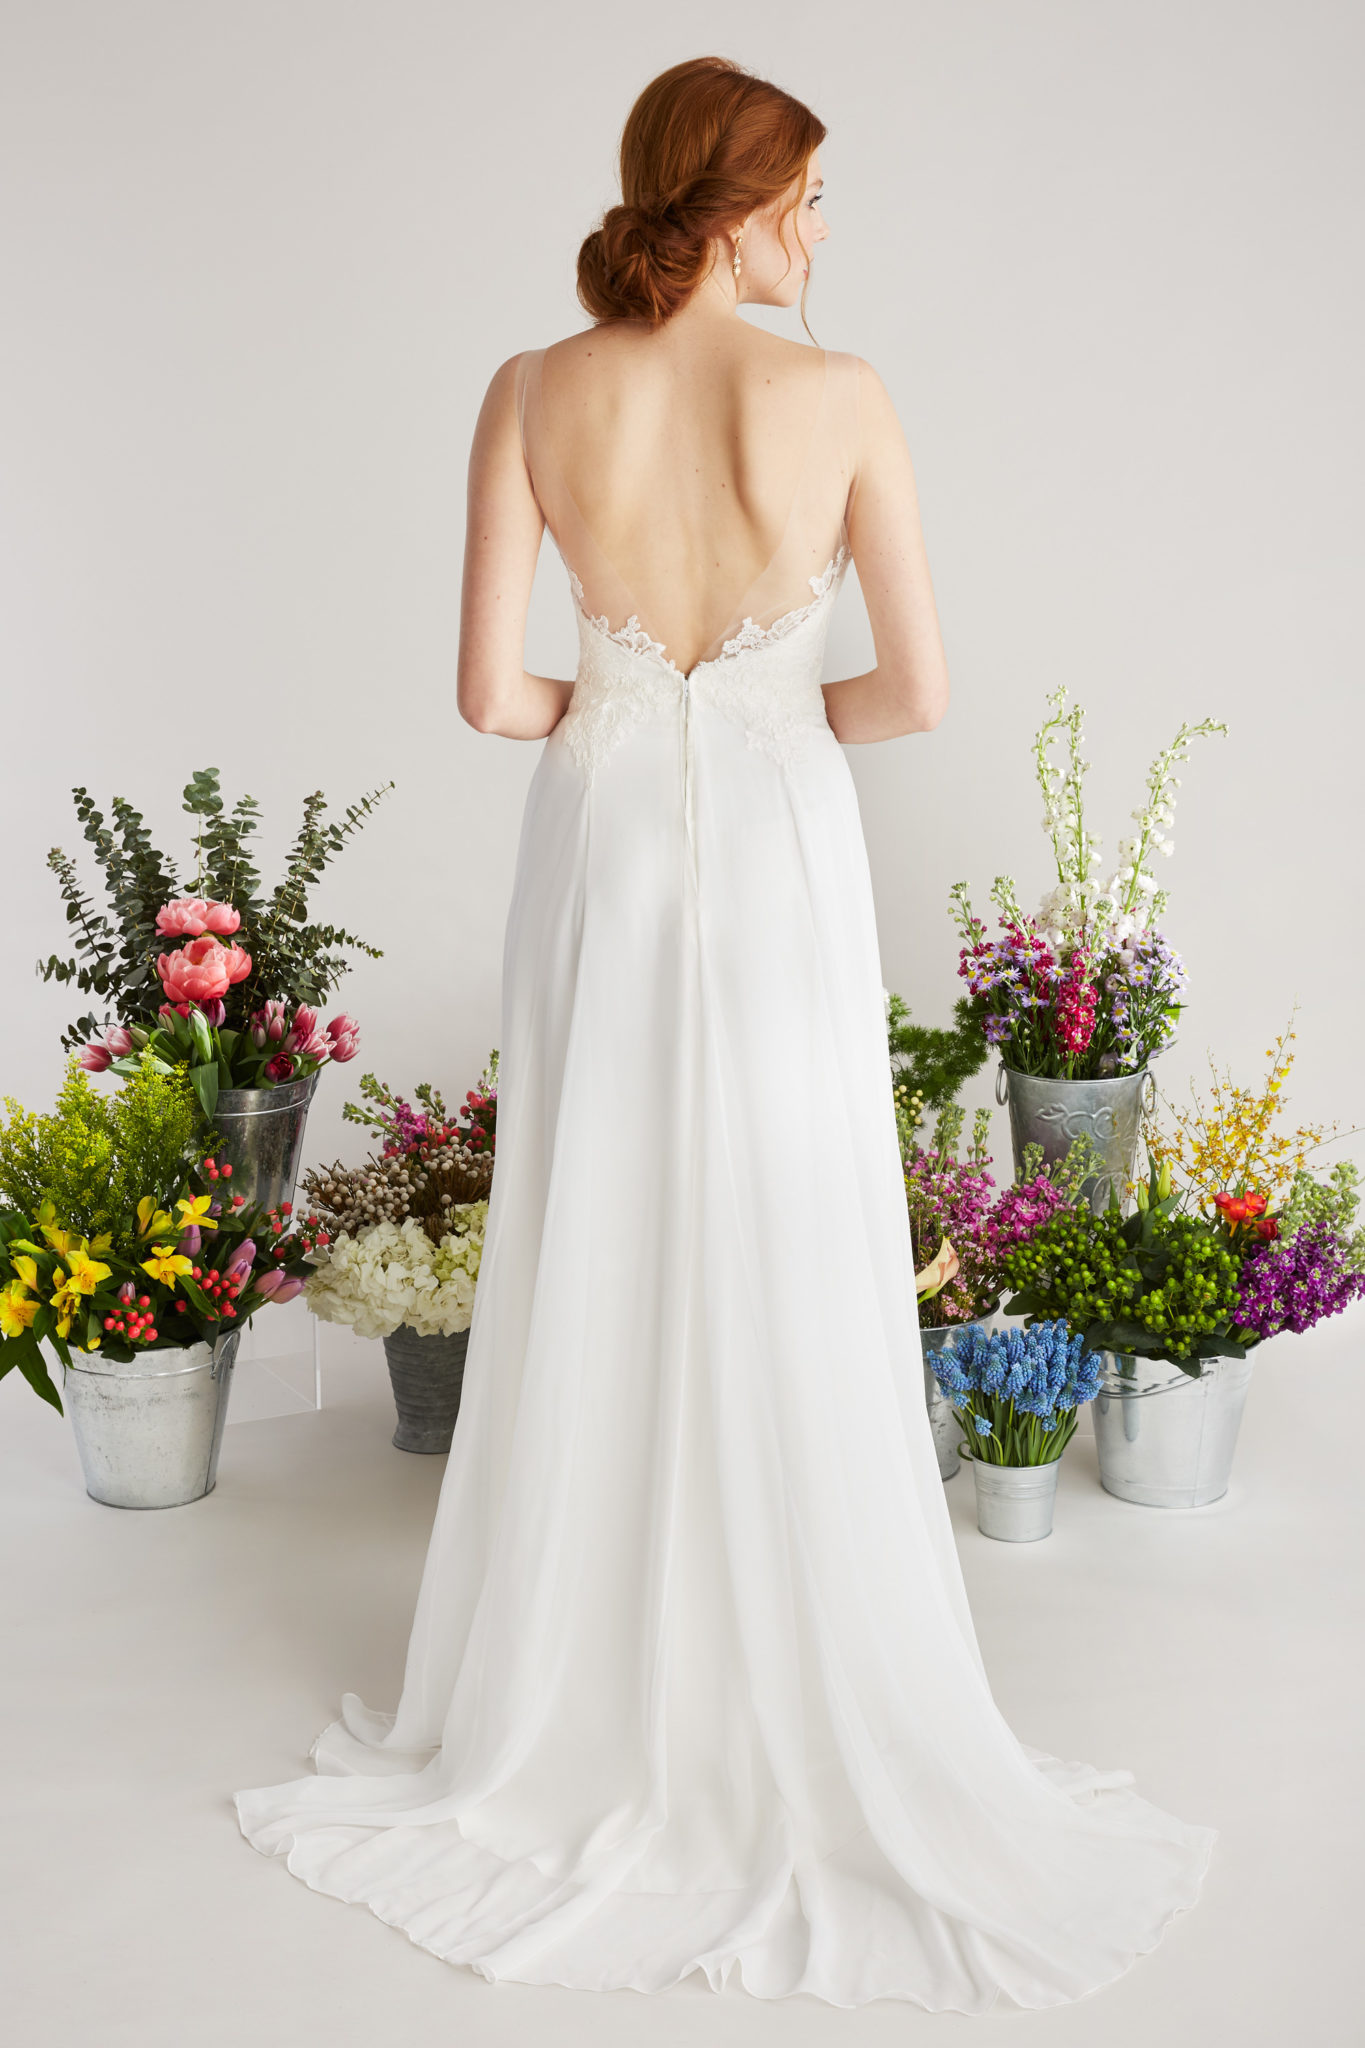 Ophelia gown